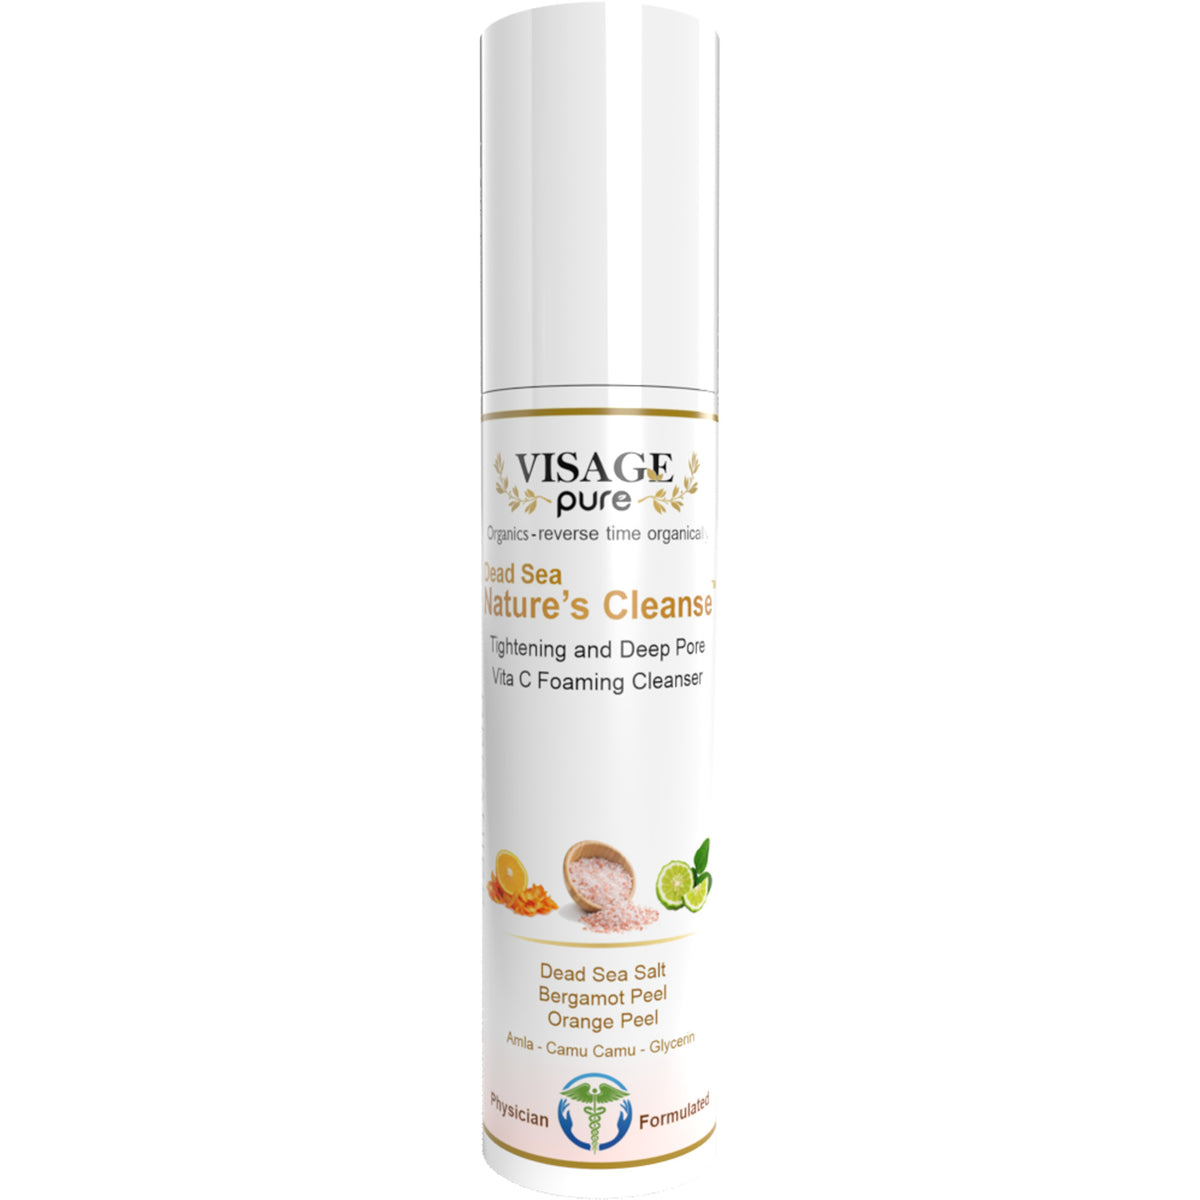 Dead Sea Nature's Cleanse Foaming Cleanser